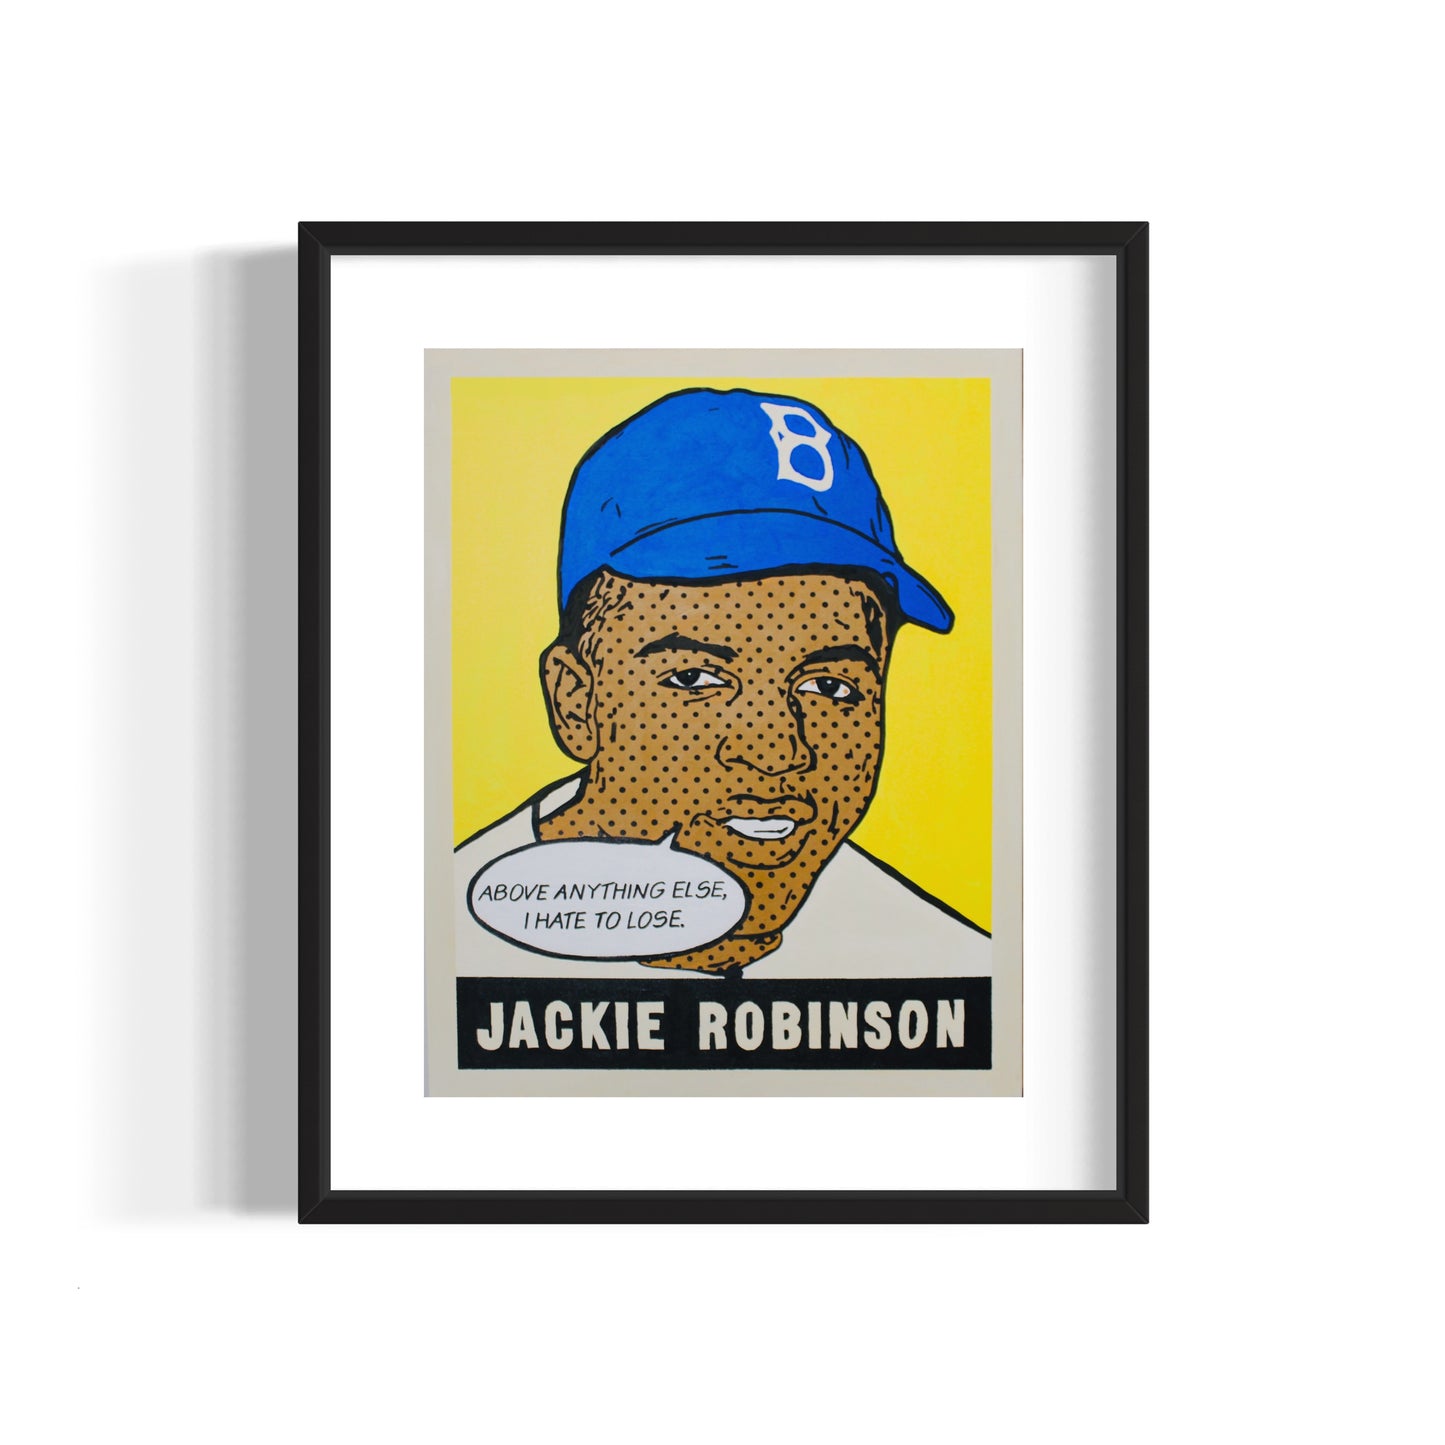 Jackie Robinson 1948 “If Cards Could Talk” Series, 2023 Giclee Print